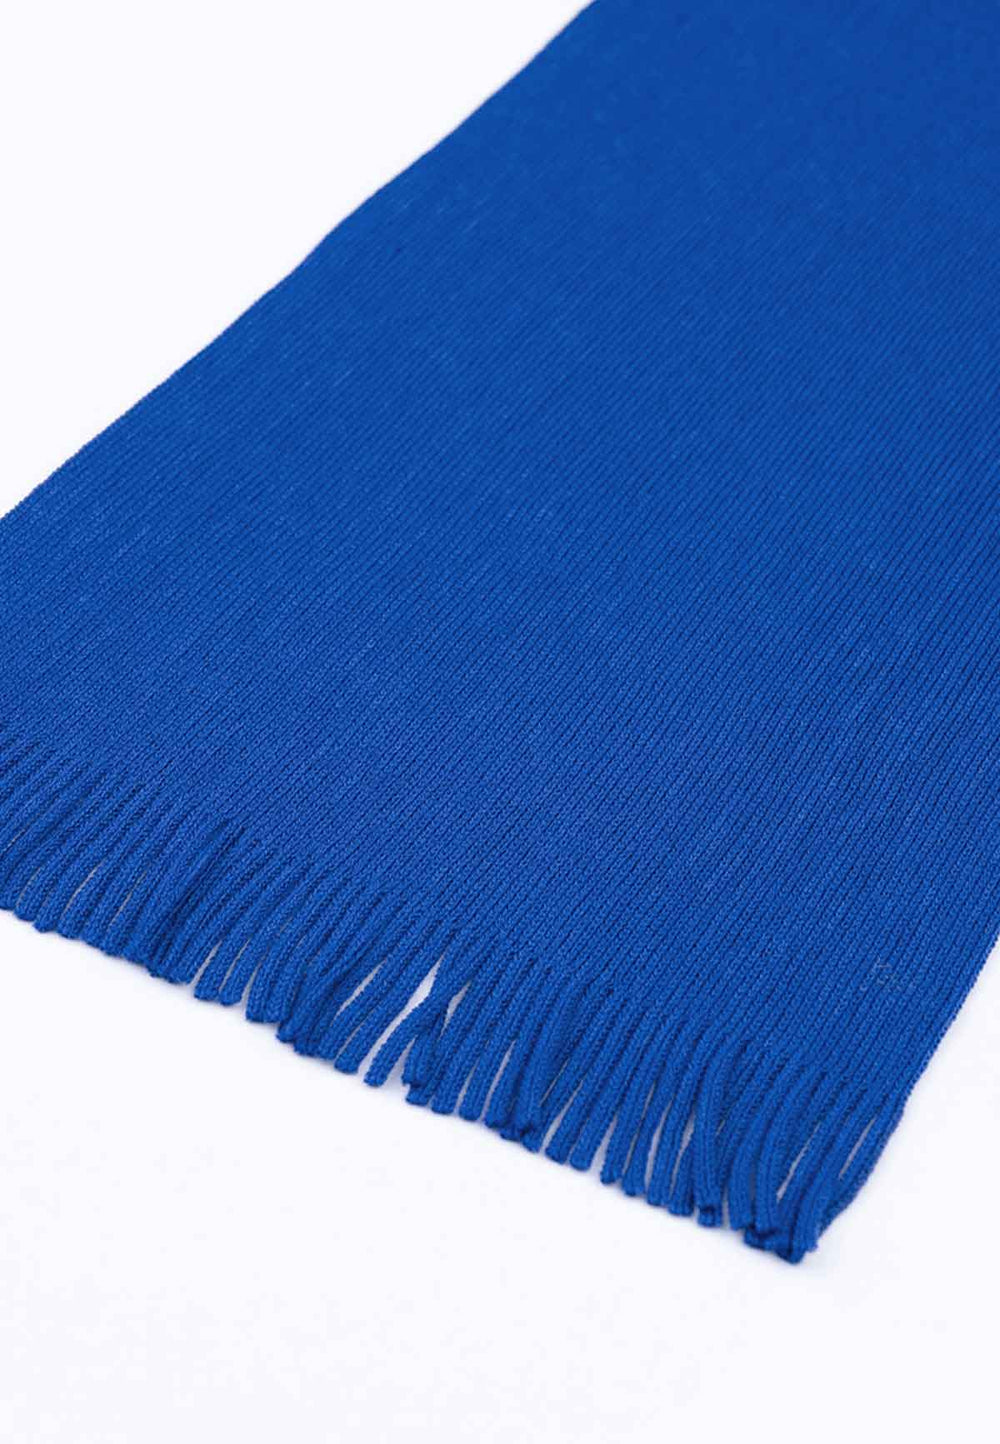 Close up photo of a merino wool scarf in cobalt blue.